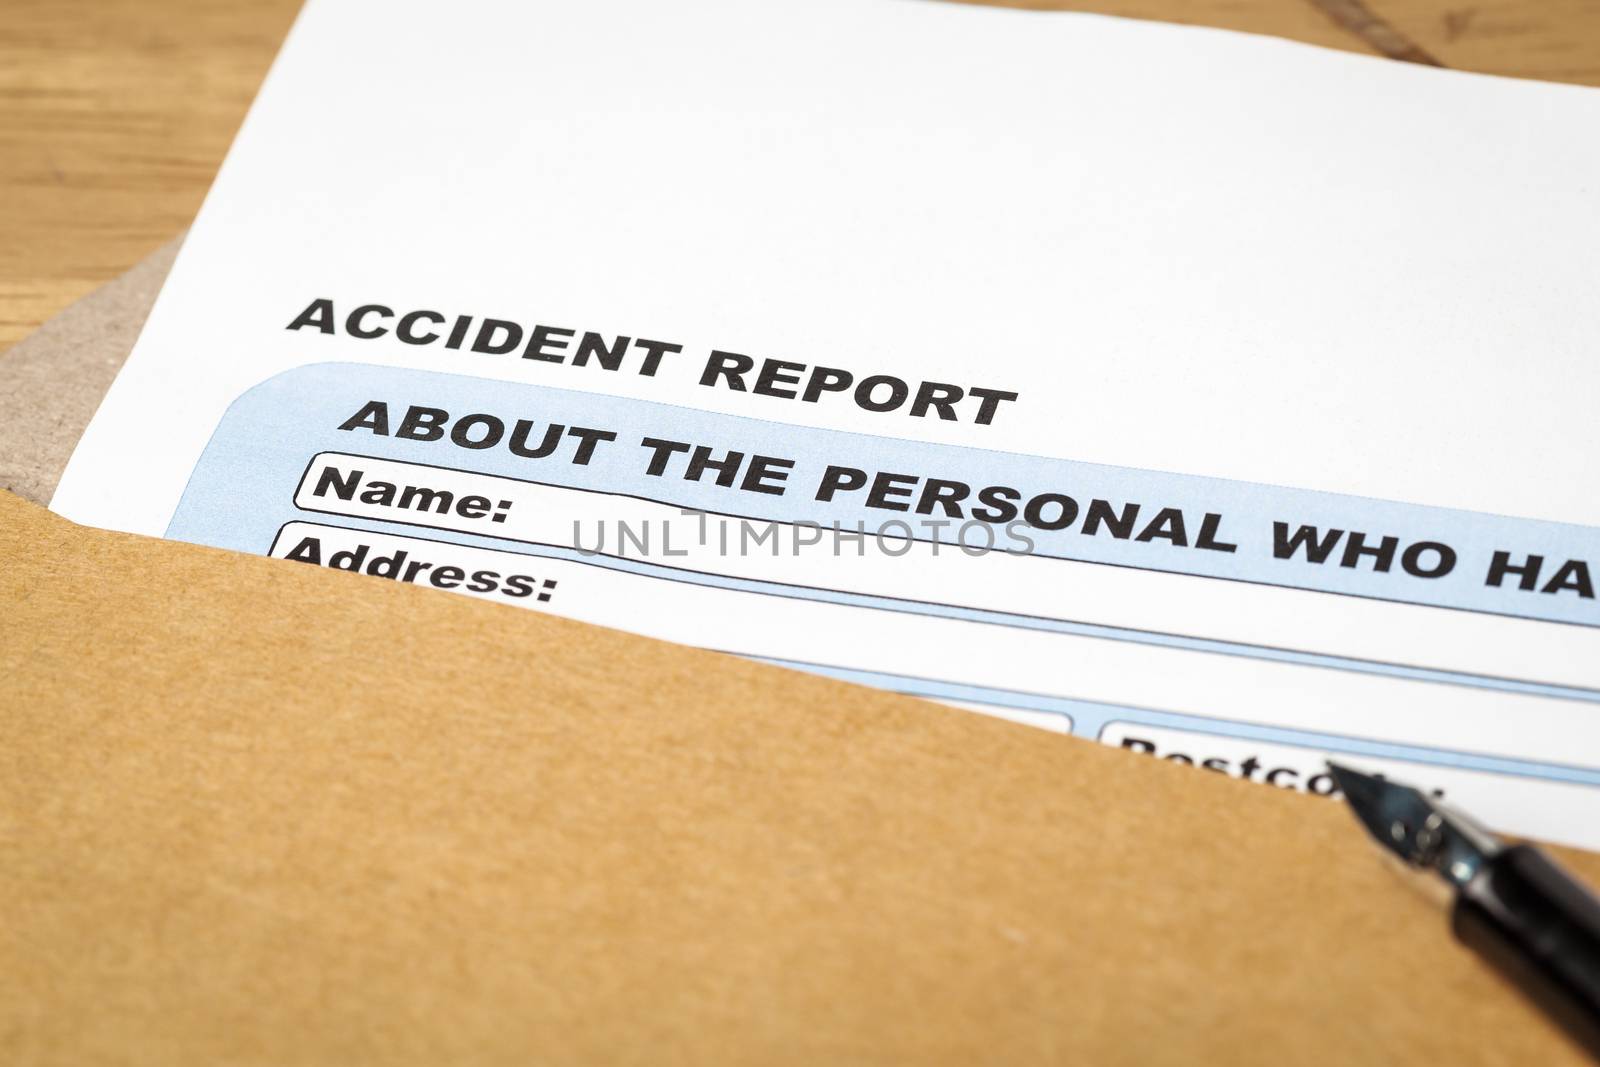 Accident report application form and pen on brown envelope, busi by FrameAngel